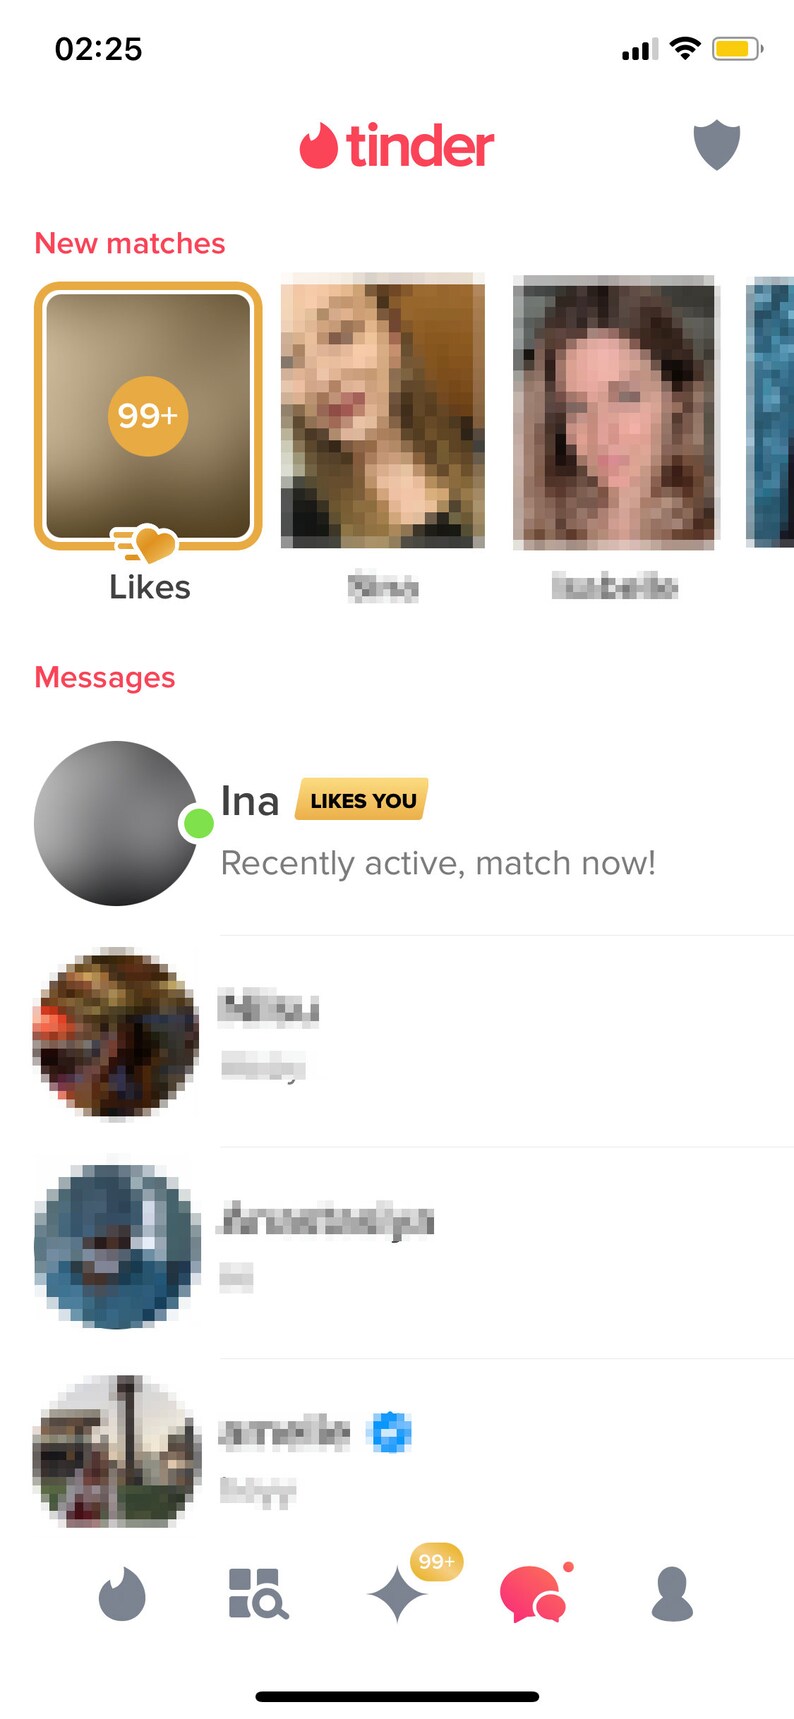 Buy How to Get 15 Tinder Matches Daily With the Tinder Glitch Online in